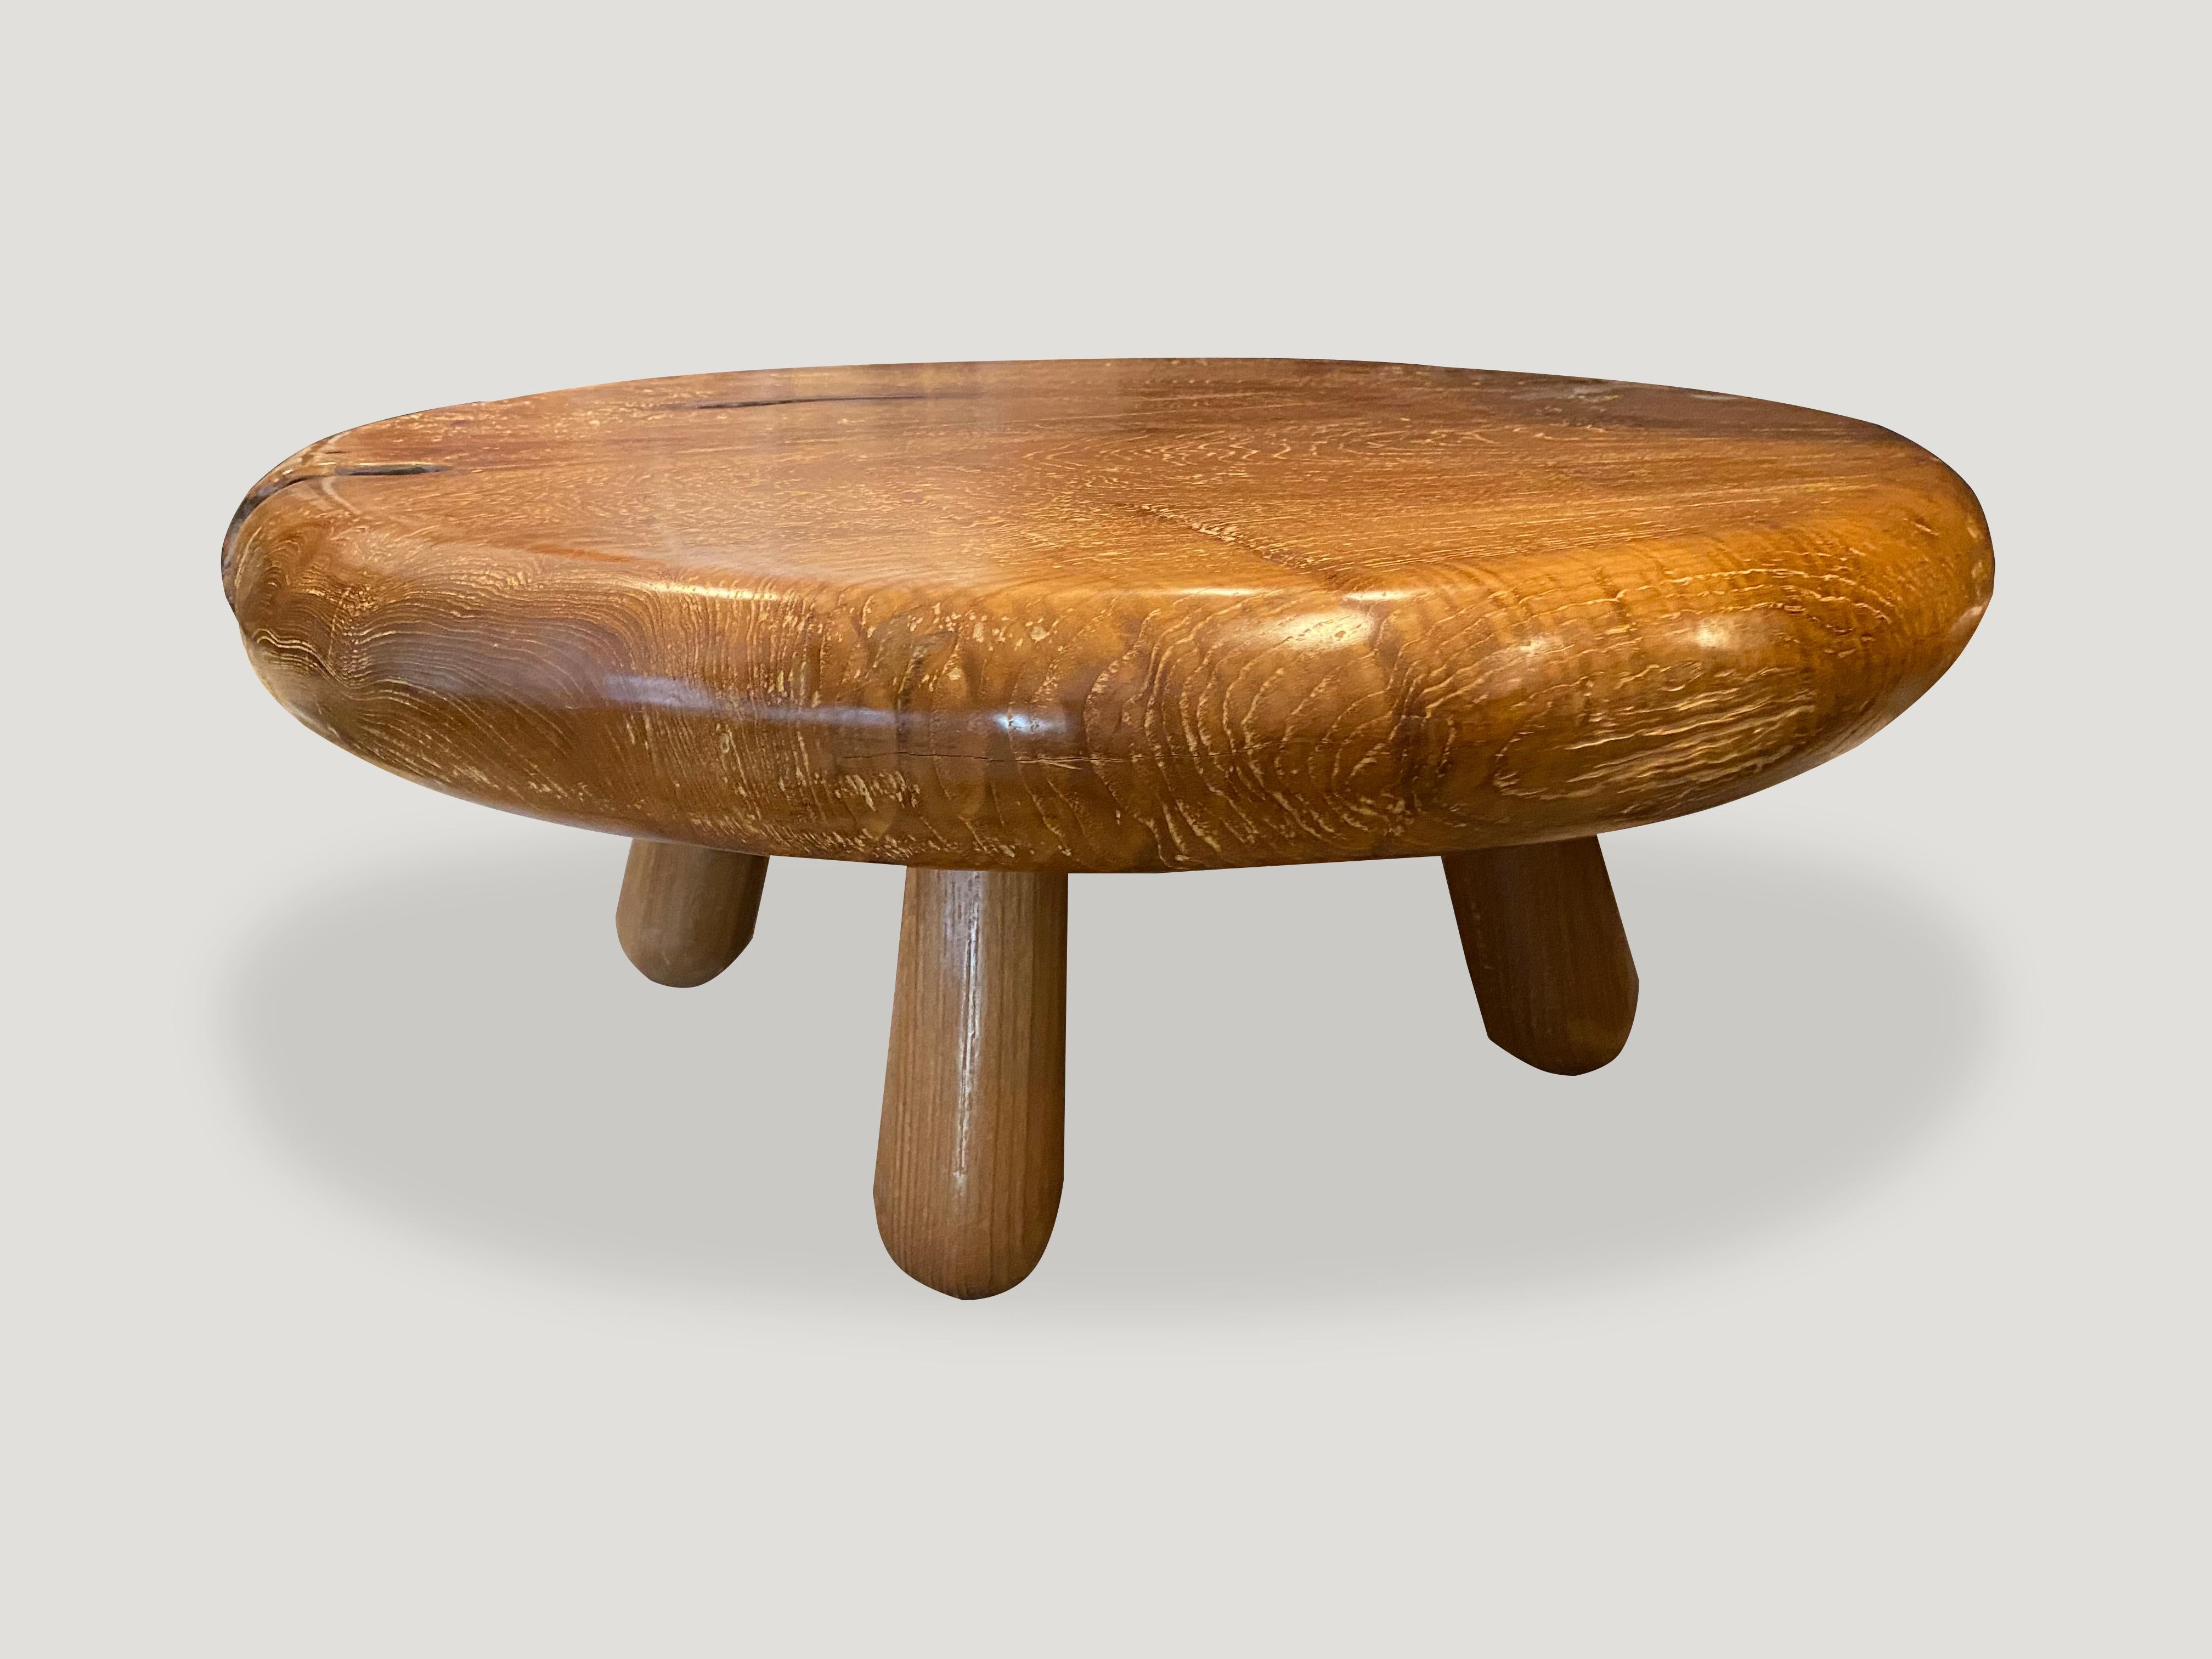 Introducing the midcentury Couture Collection new to 2021. Furniture constructed by hand from start to finish. An impressive single five inch slab of reclaimed teak wood taken from my finest collection, is hand carved into a stunning beveled top